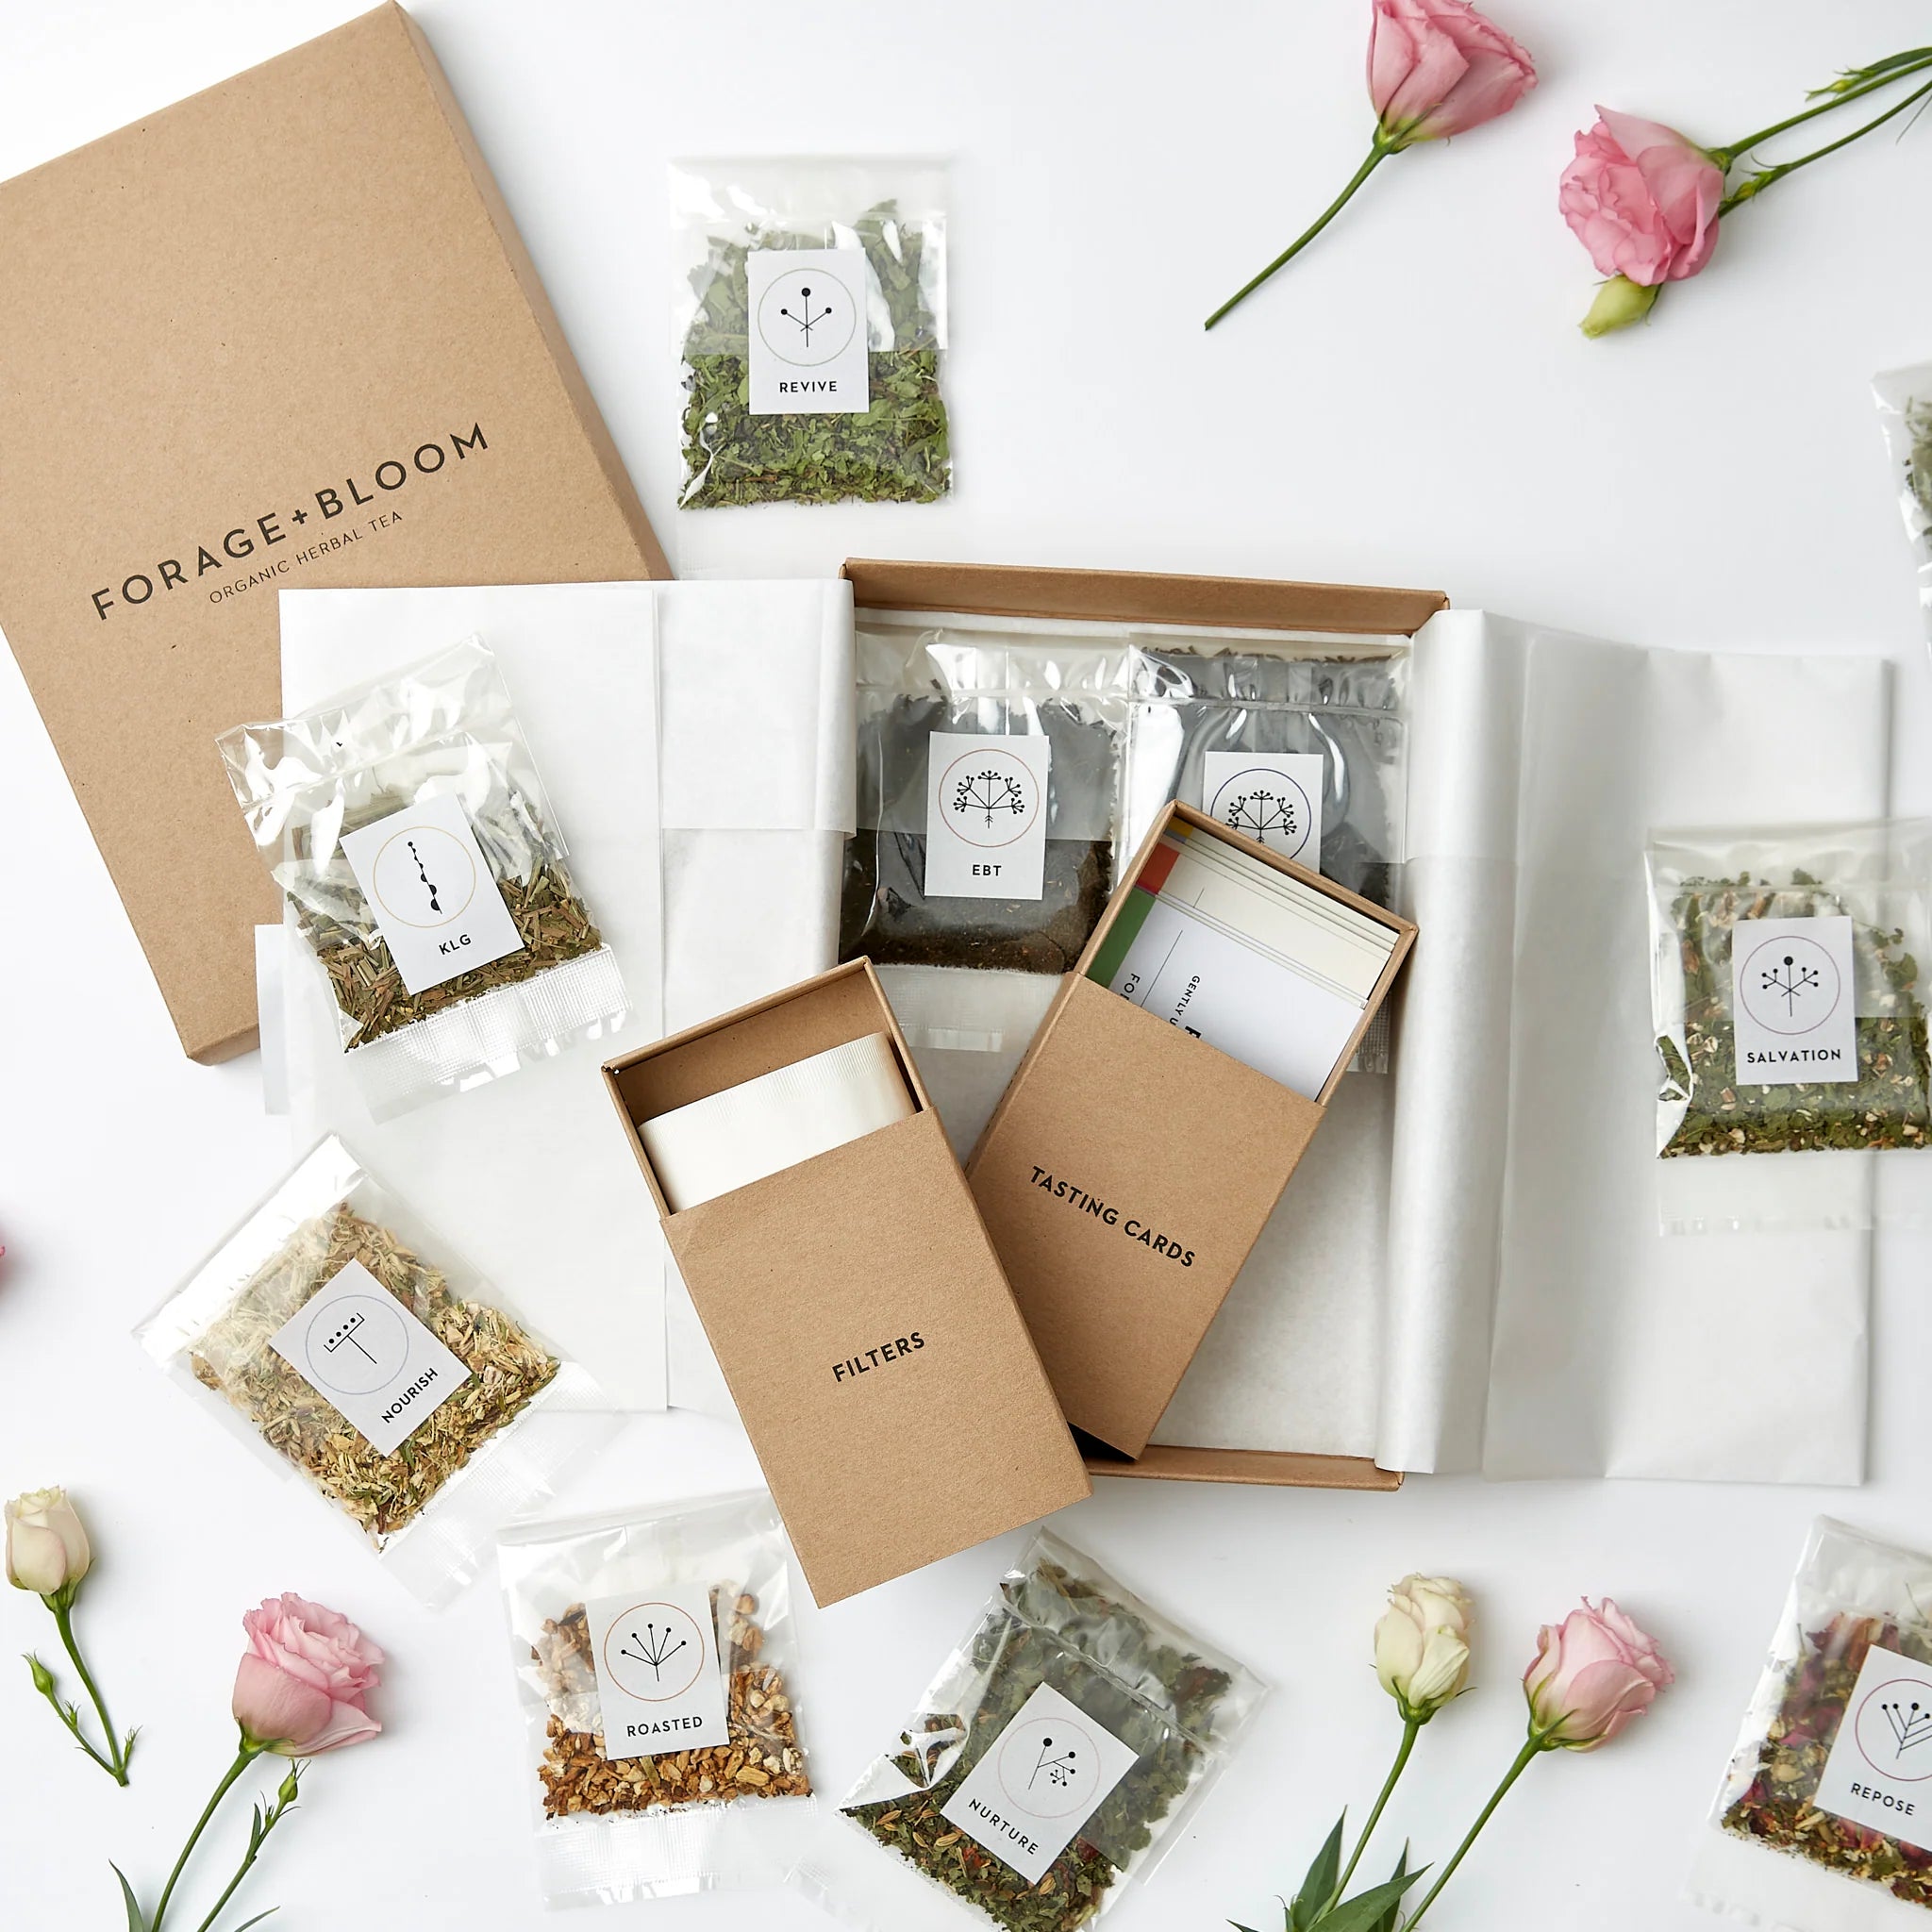 An assortment of elegantly packaged organic herbal tea blends, accompanied by the Tea Testing Box Set by Forage + Bloom and fresh flowers, thoughtfully presented in a gift box for a soothing and sophisticated tea experience.